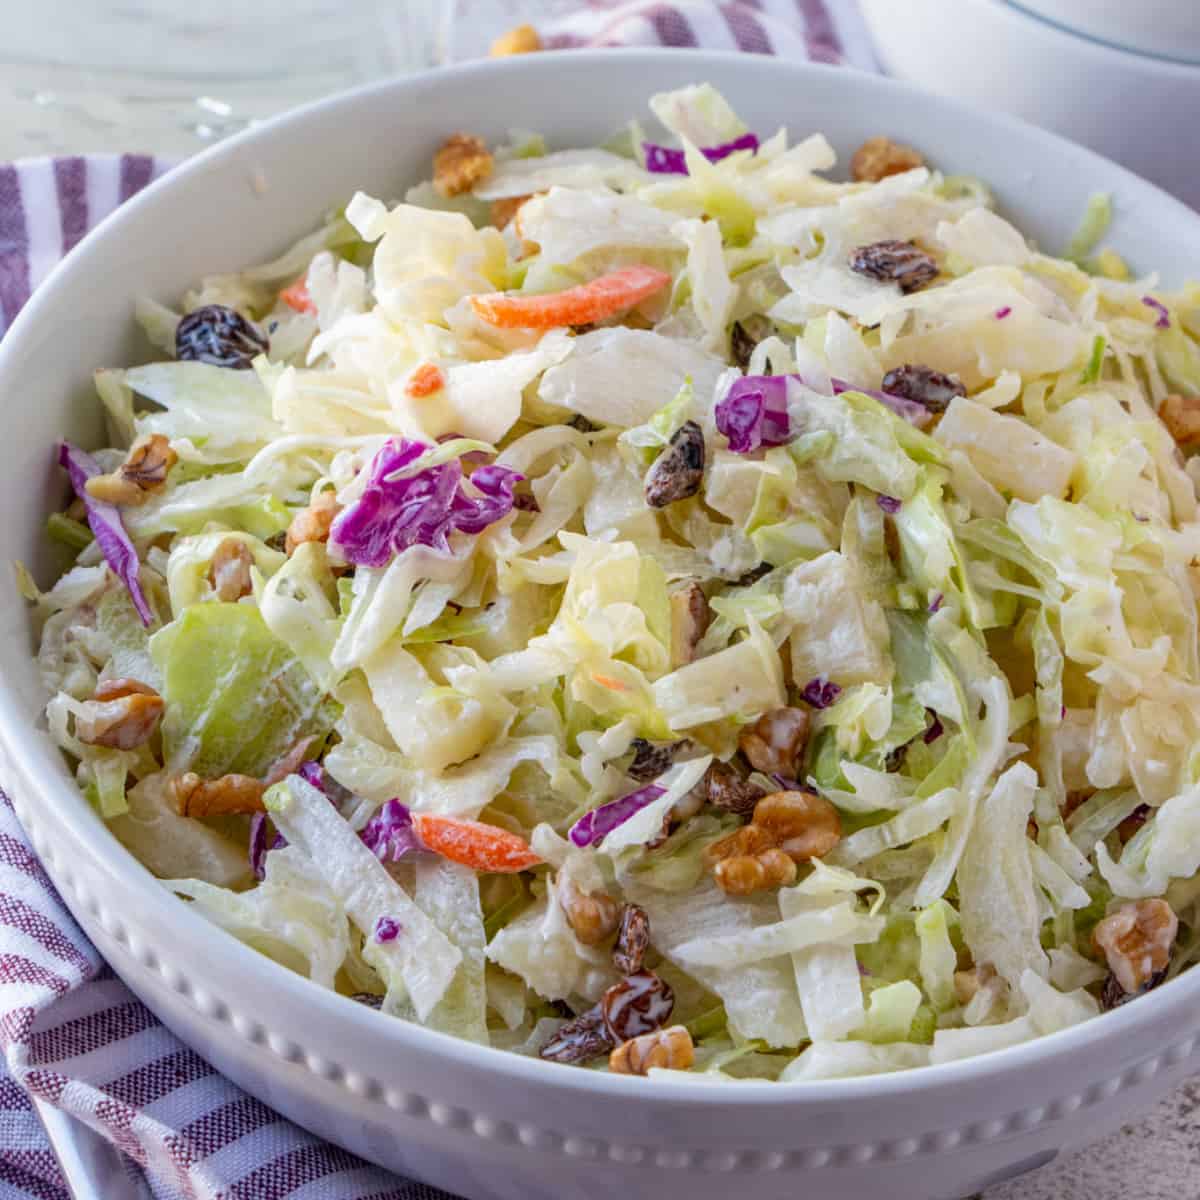 Square shot of coleslaw in a bowl.